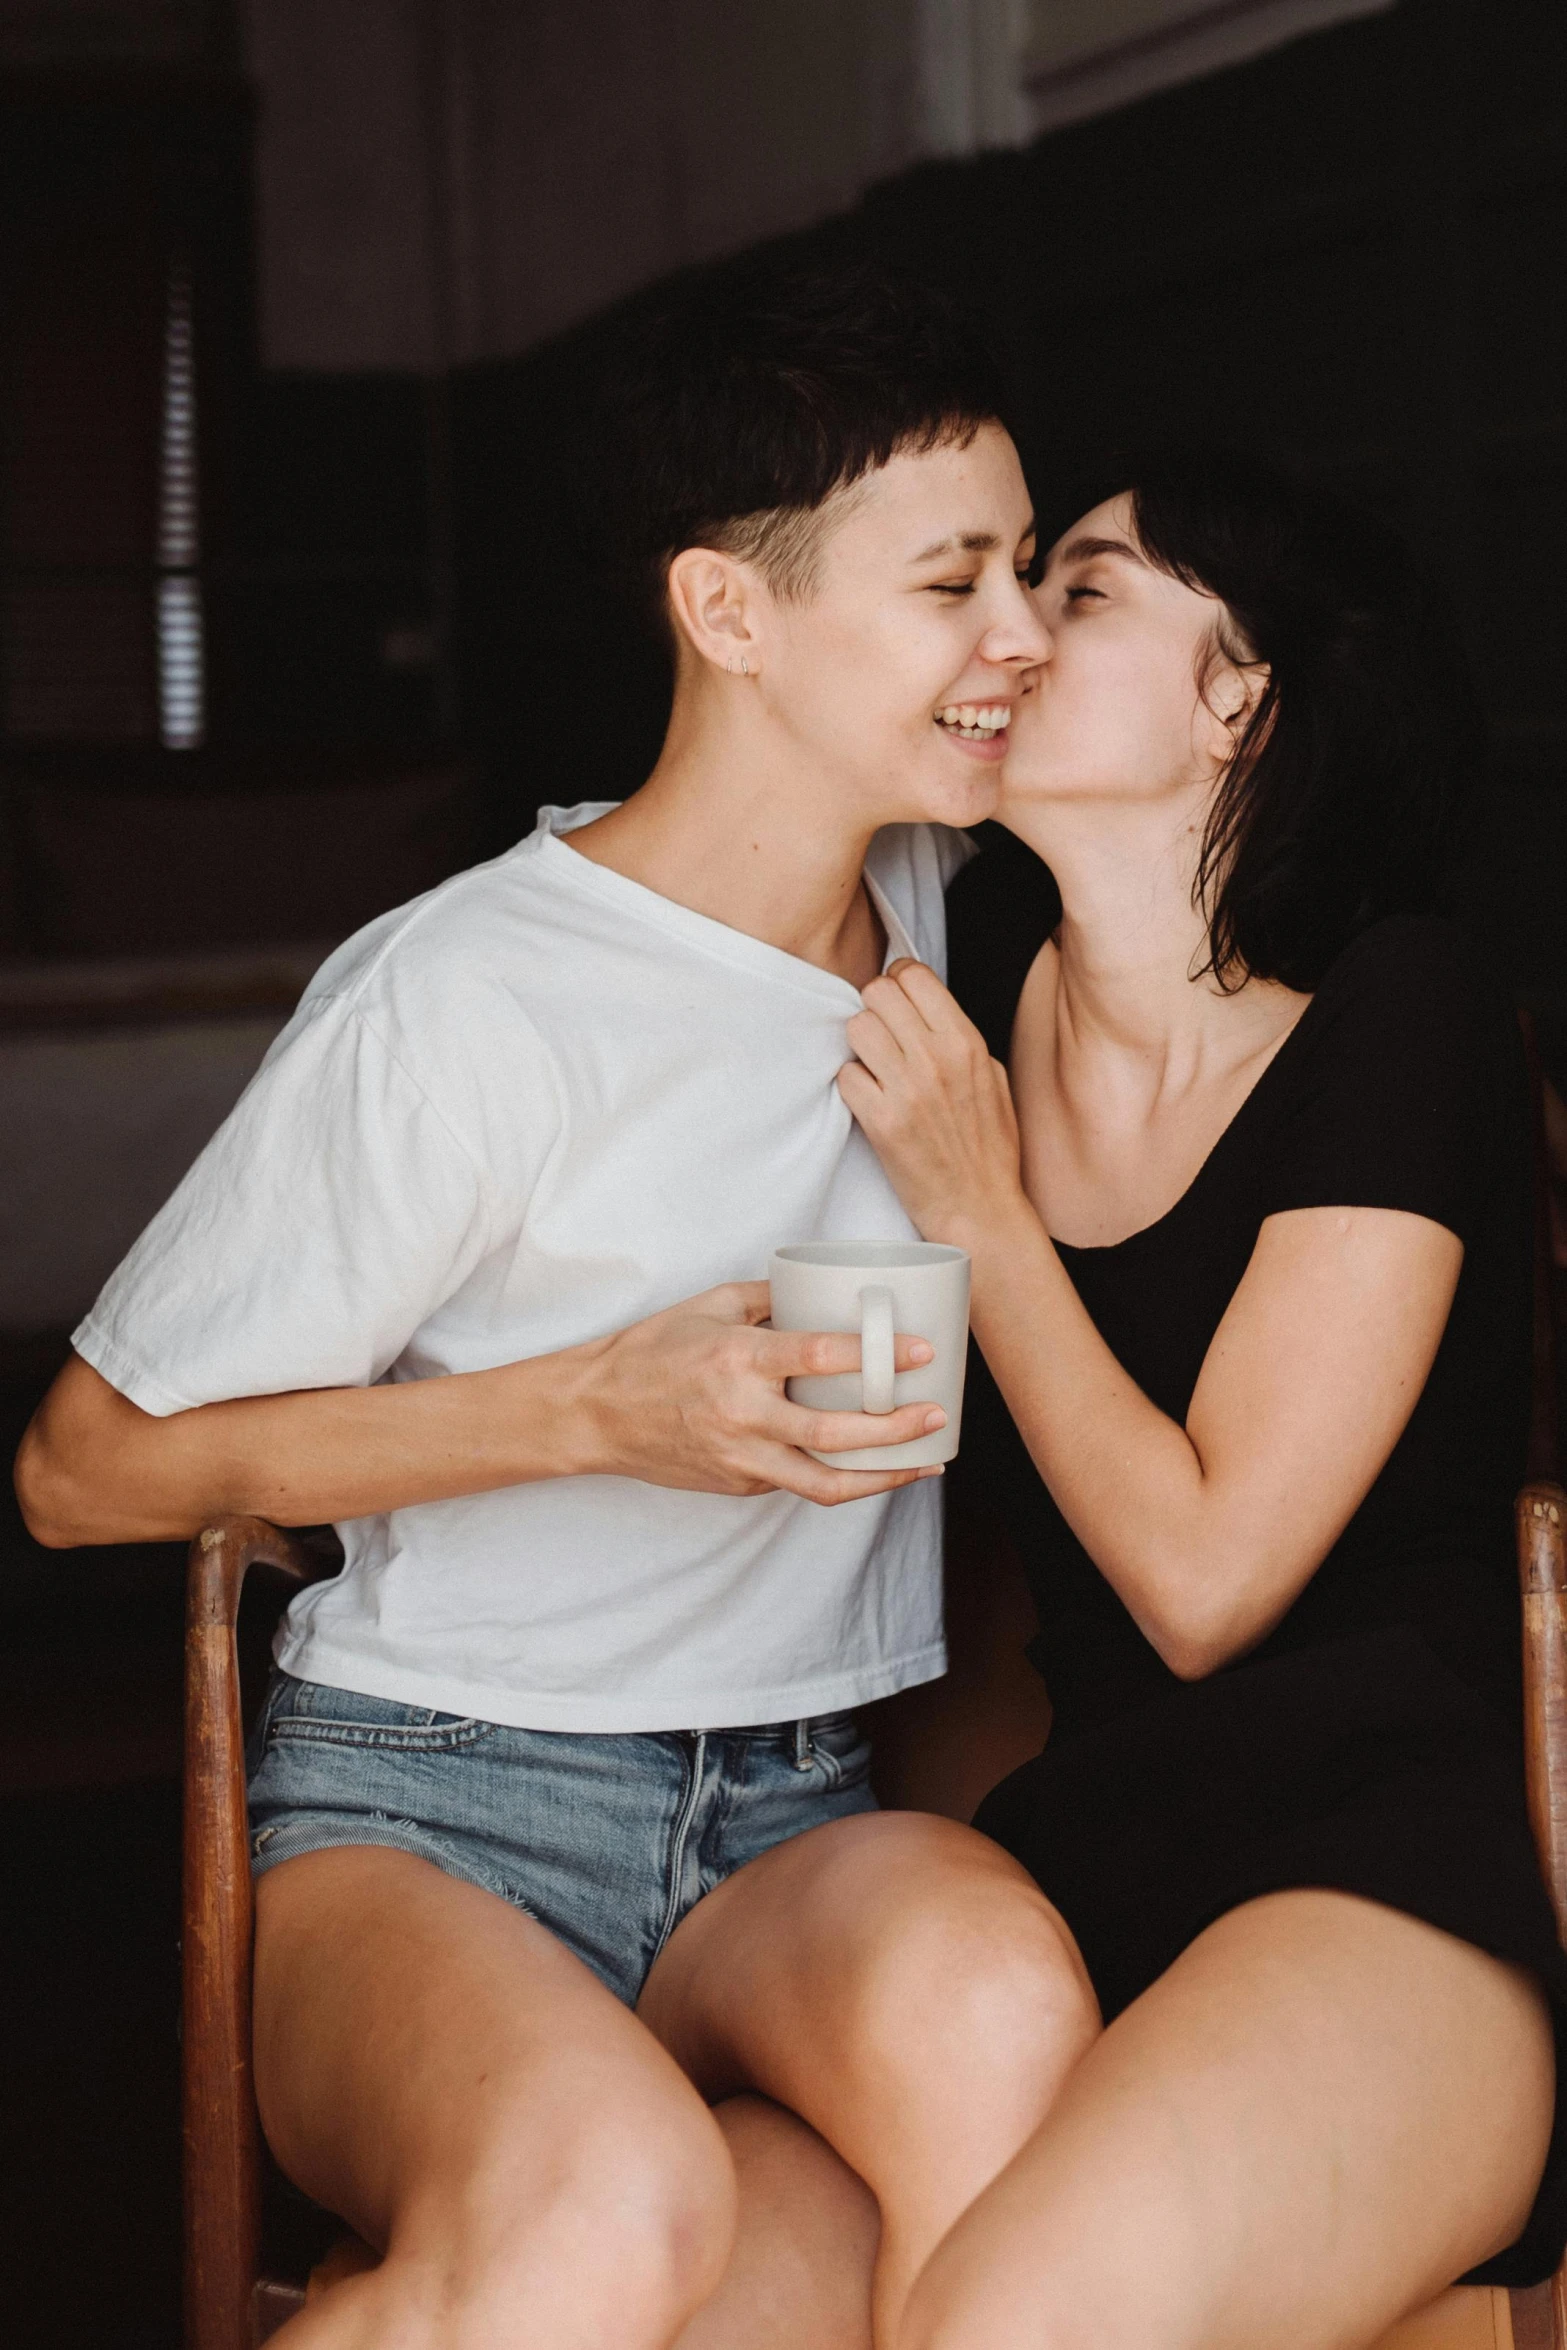 a boy and a girl sitting on a chair kissing